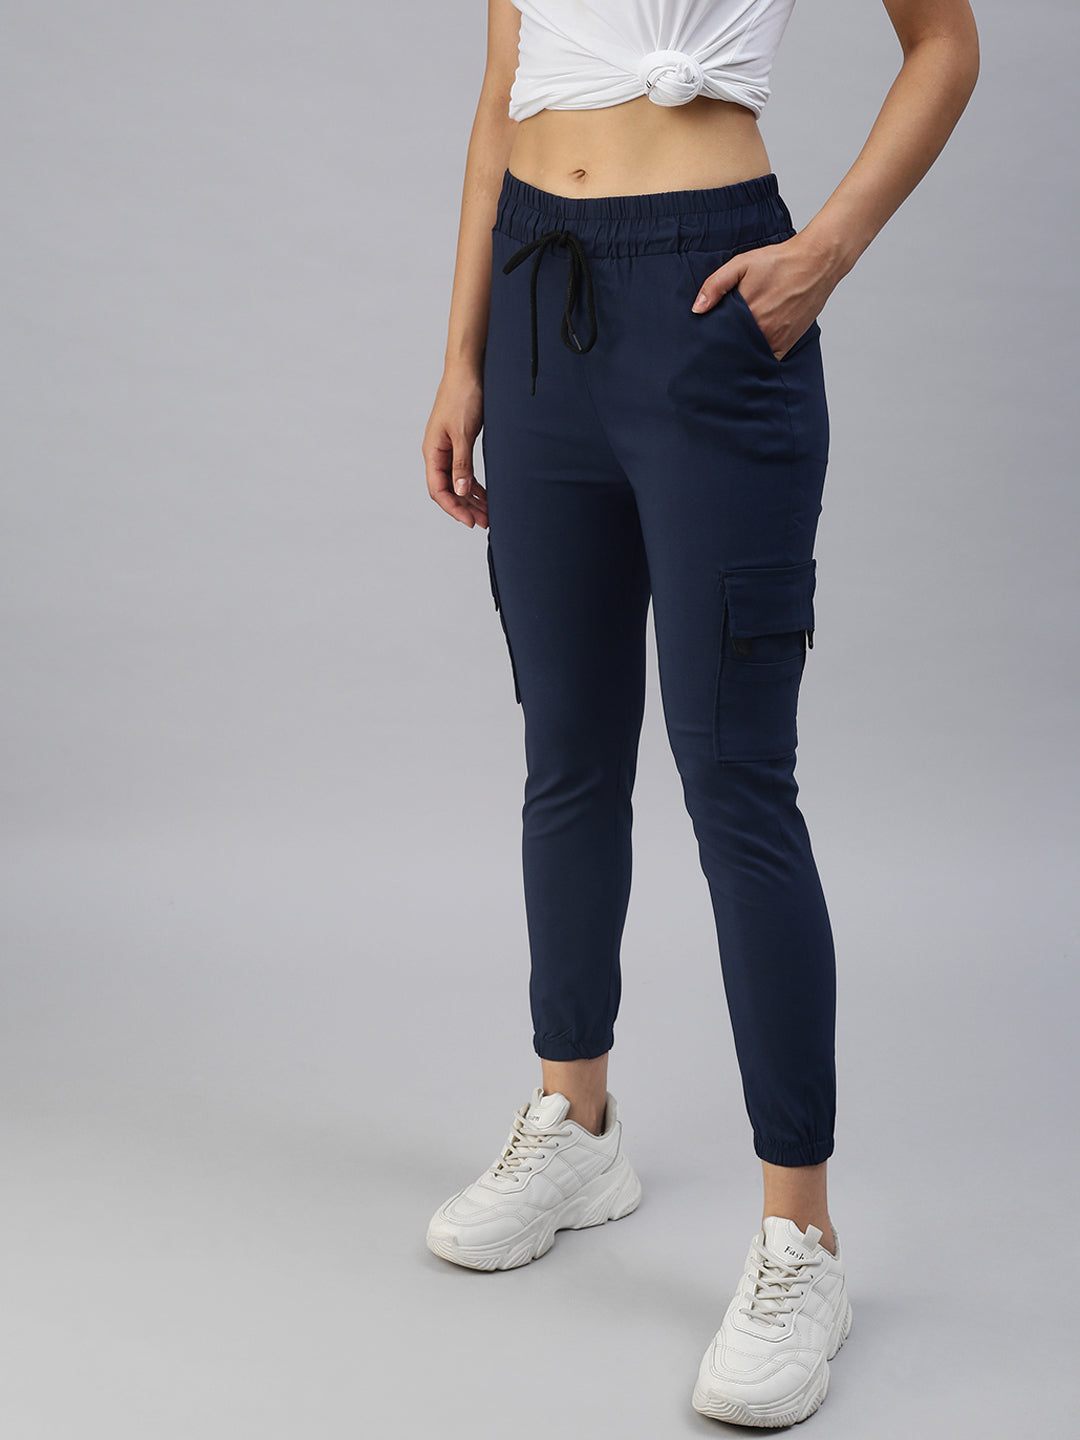 Women's Navy Blue Solid Joggers Track Pant